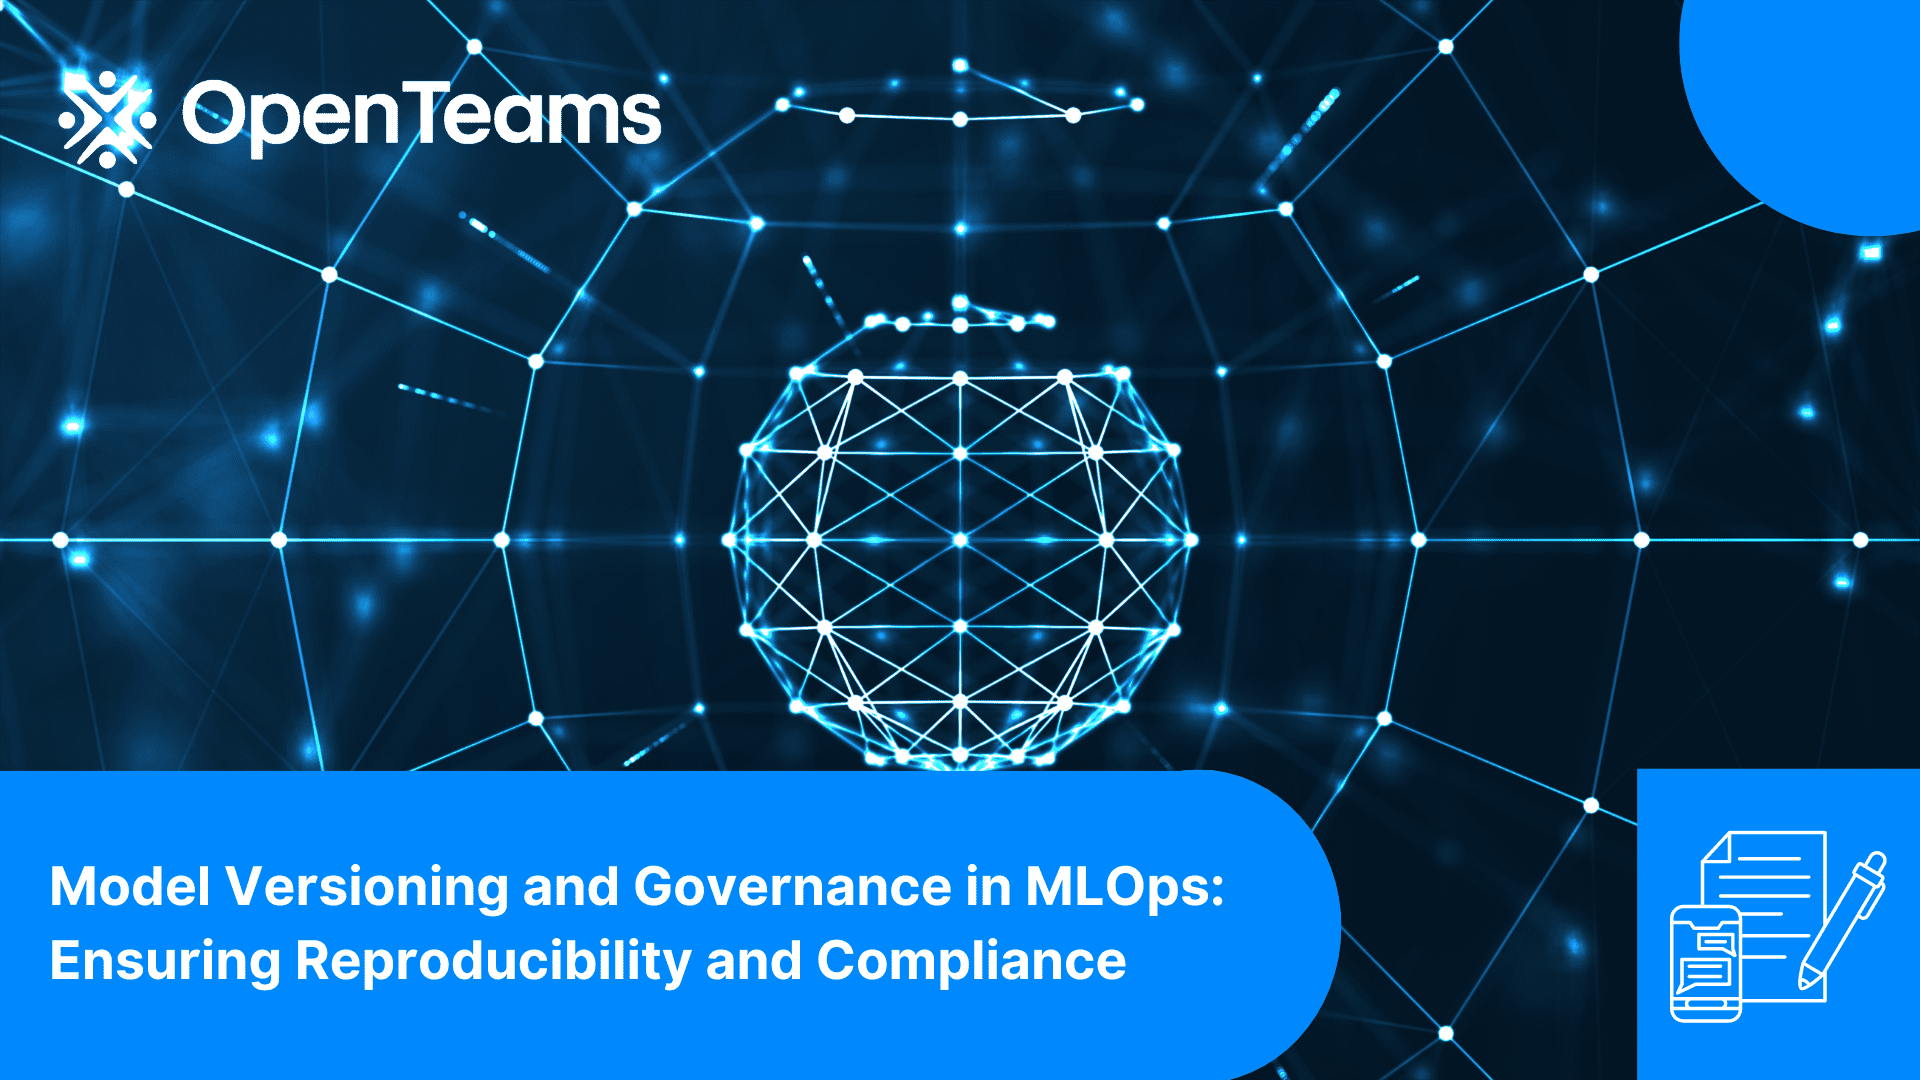 Model Versioning and Governance in MLOps: Ensuring Reproducibility and Compliance